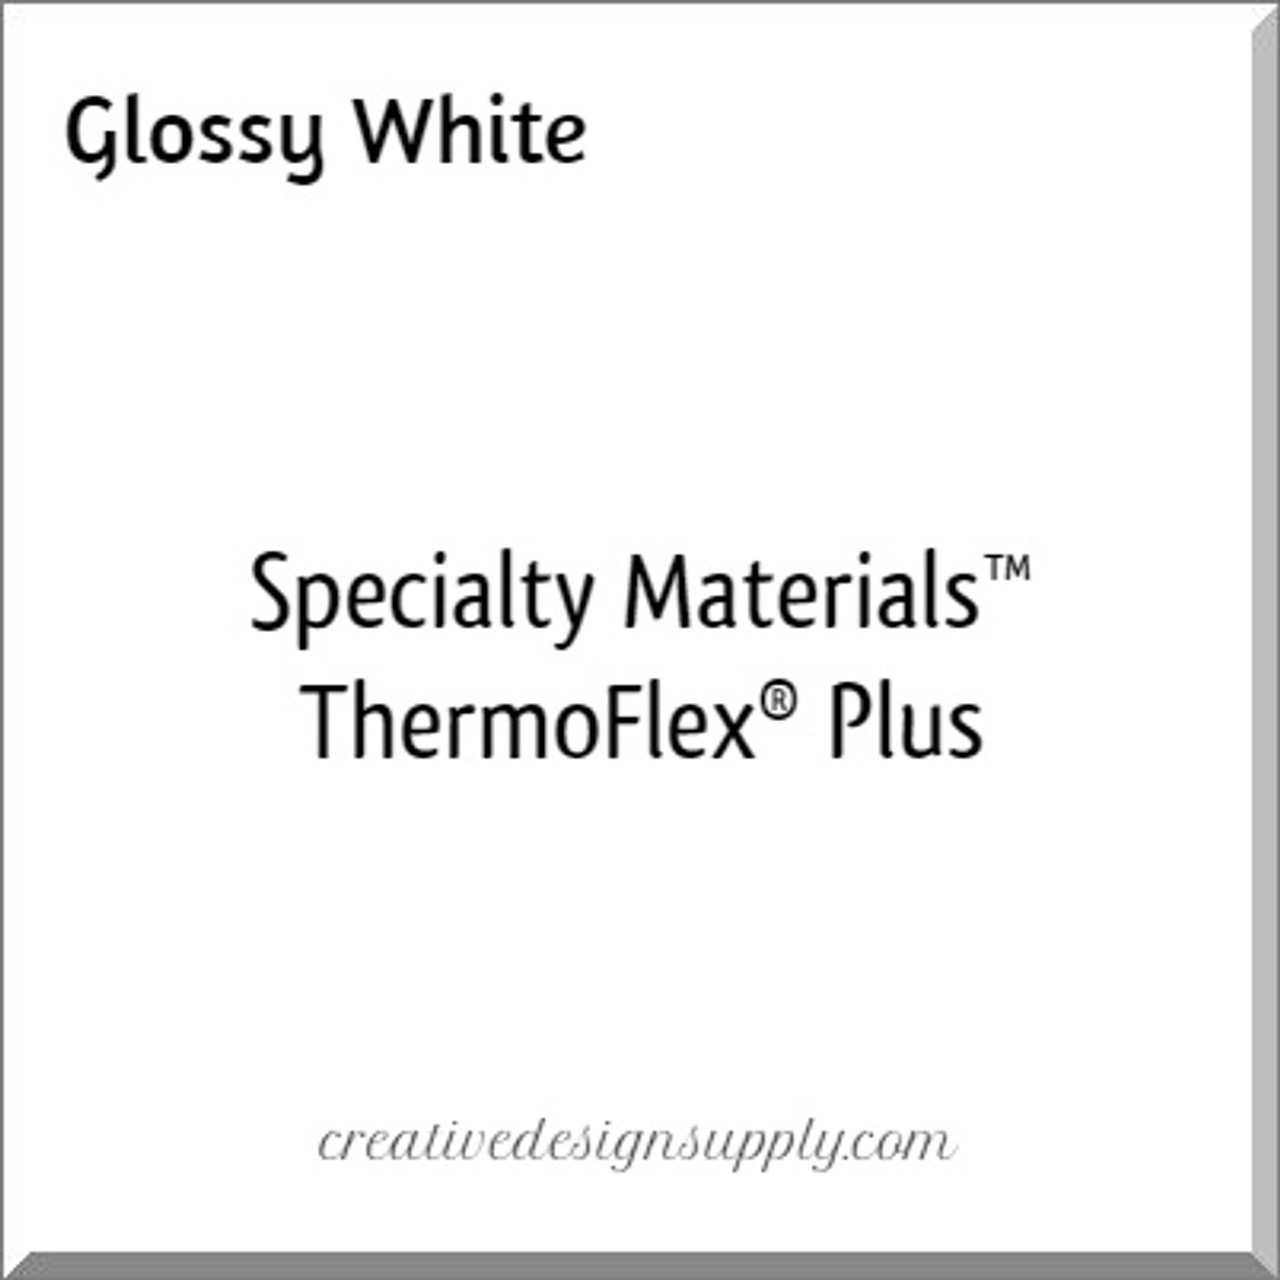 Specialty Materials™ ThermoFlex® Plus | Glossy White